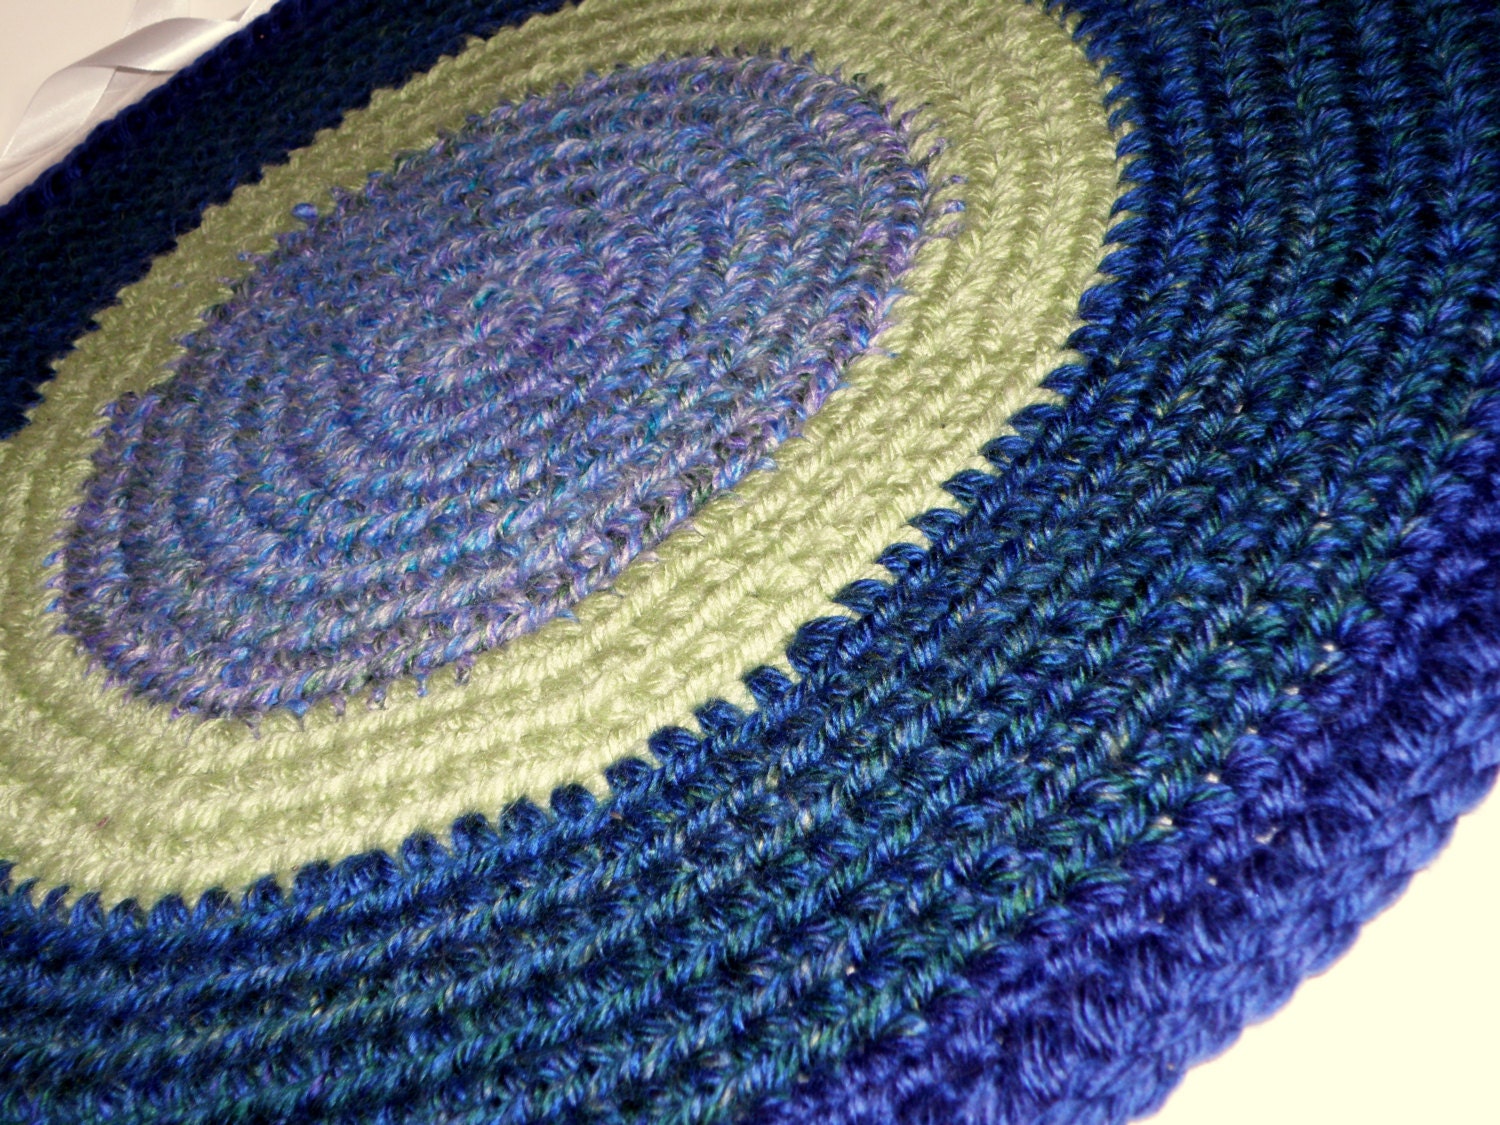 Thick Crochet Rag Rug, Handmade Area Rug or Pet Bed Round in Deep Shades of Teal and Sea Blues with Green. - CottageCoveCrochet